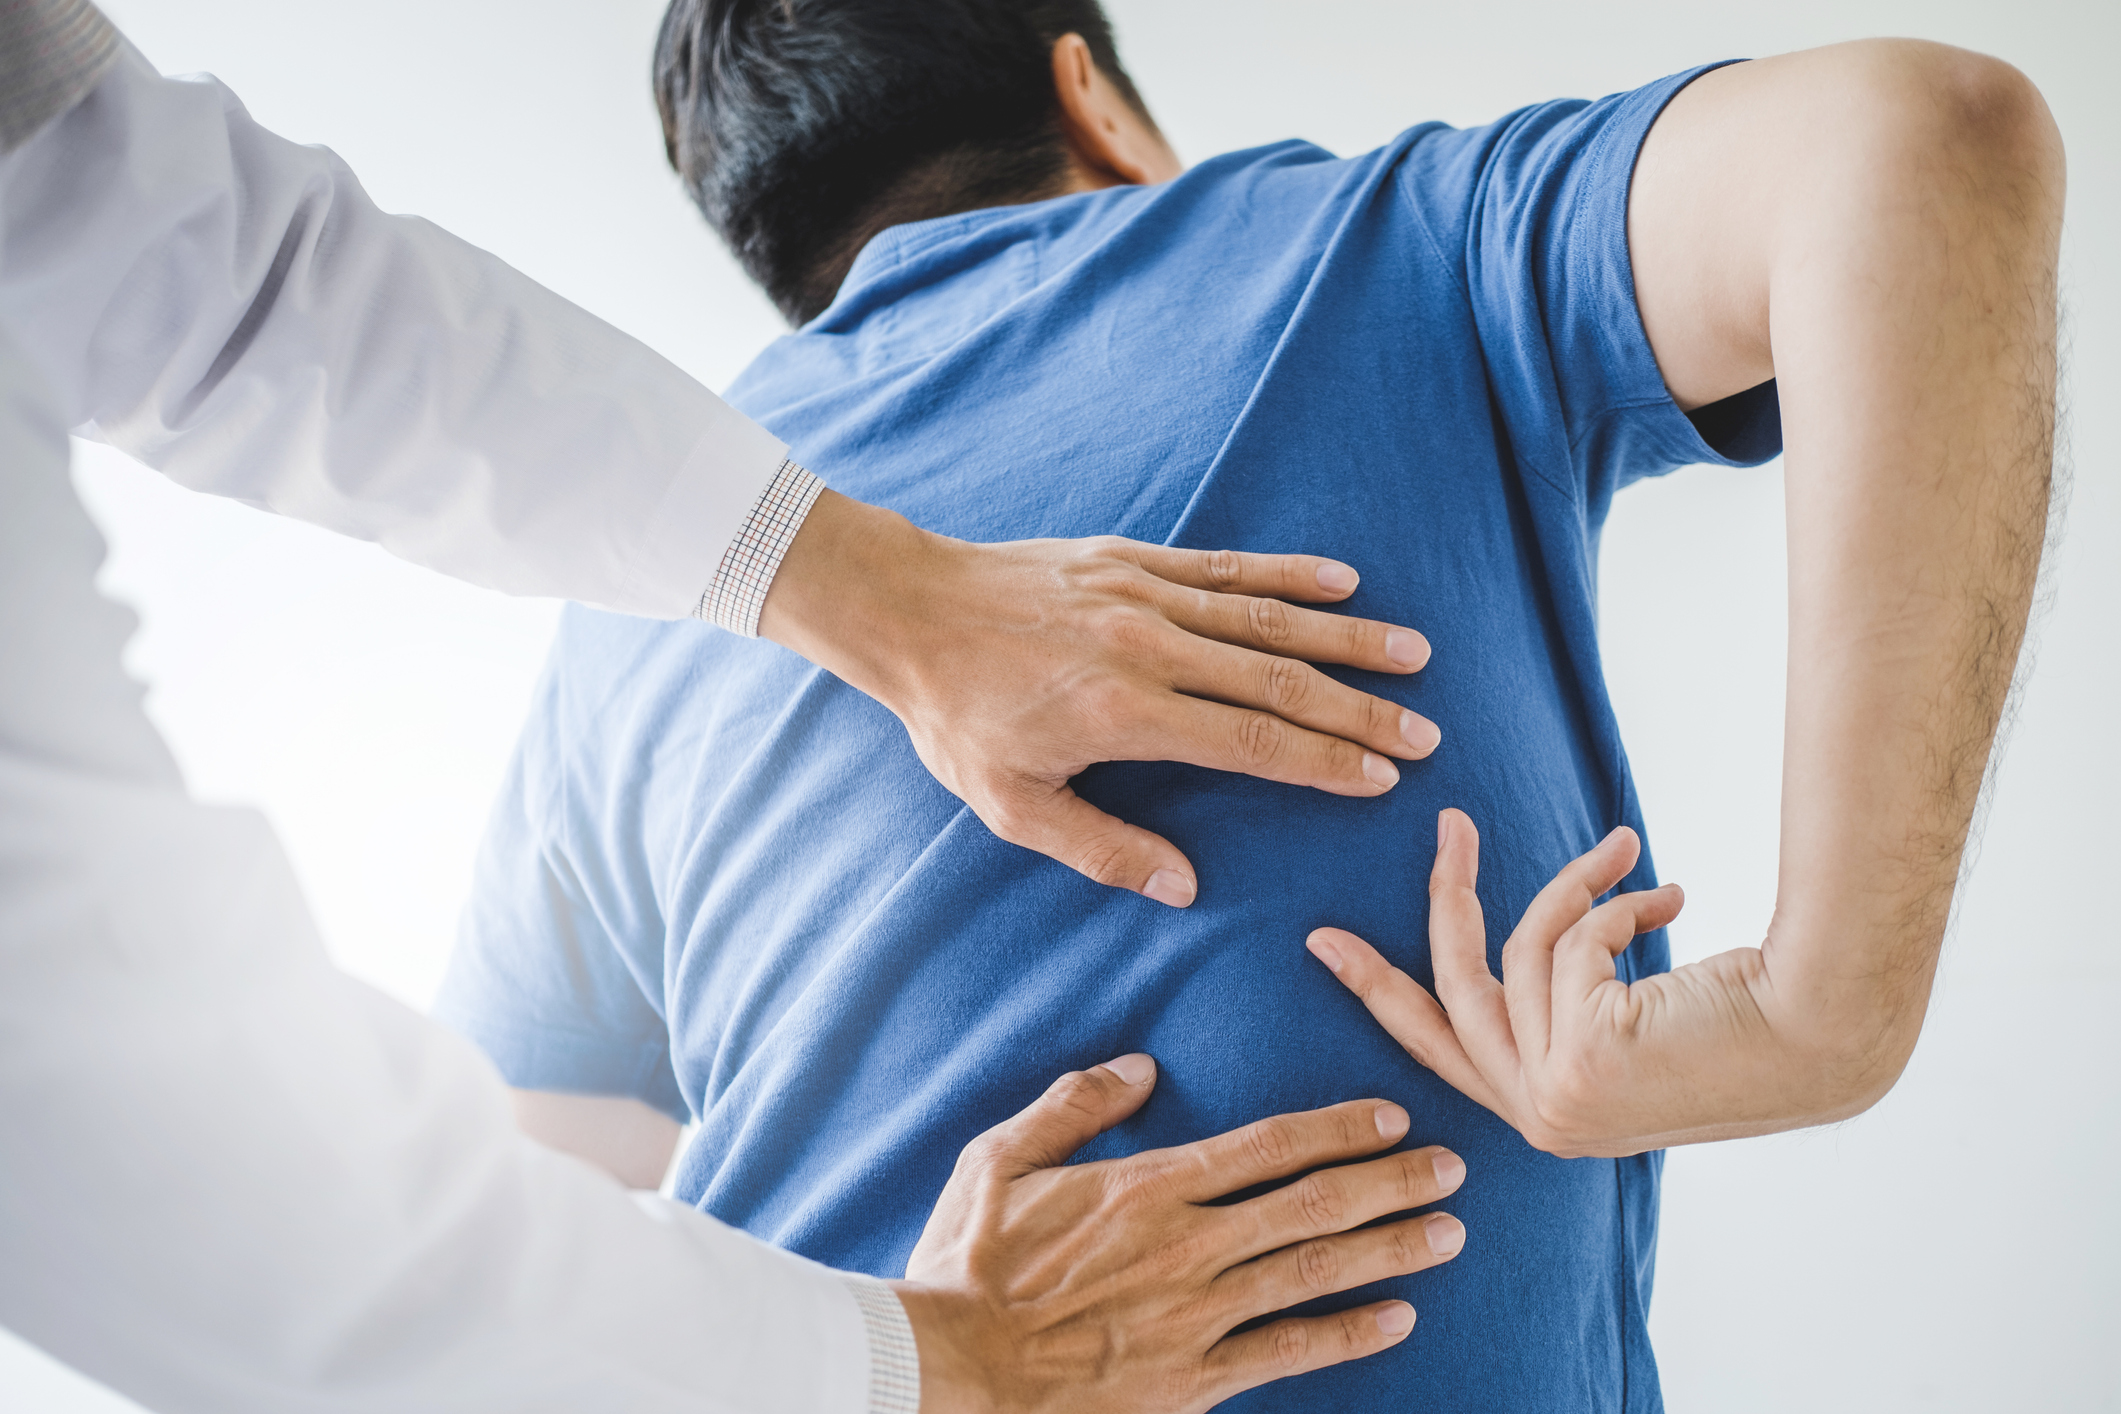 Physical Therapy as a Non-Surgical Treatment